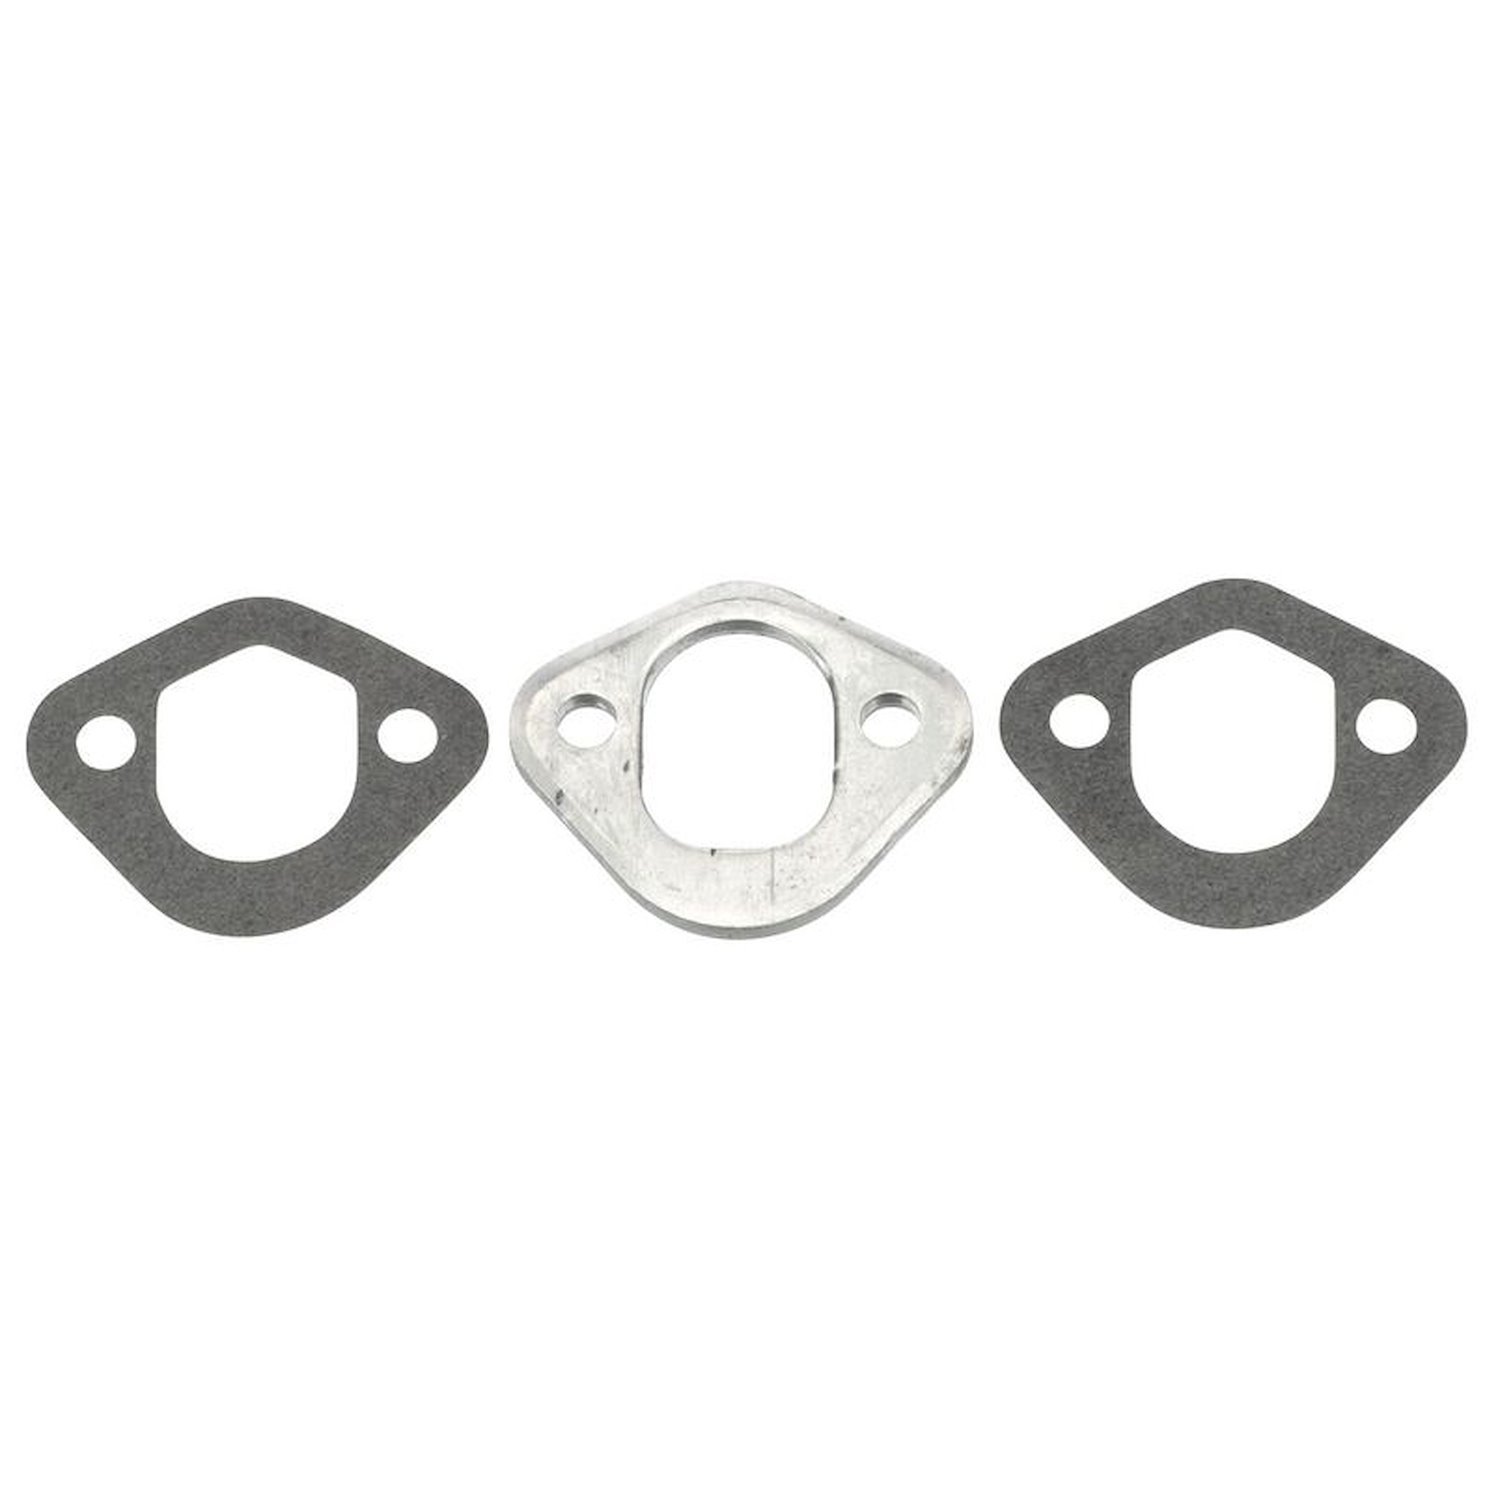 Fuel Pump Spacer for 1981-1990 Toyota